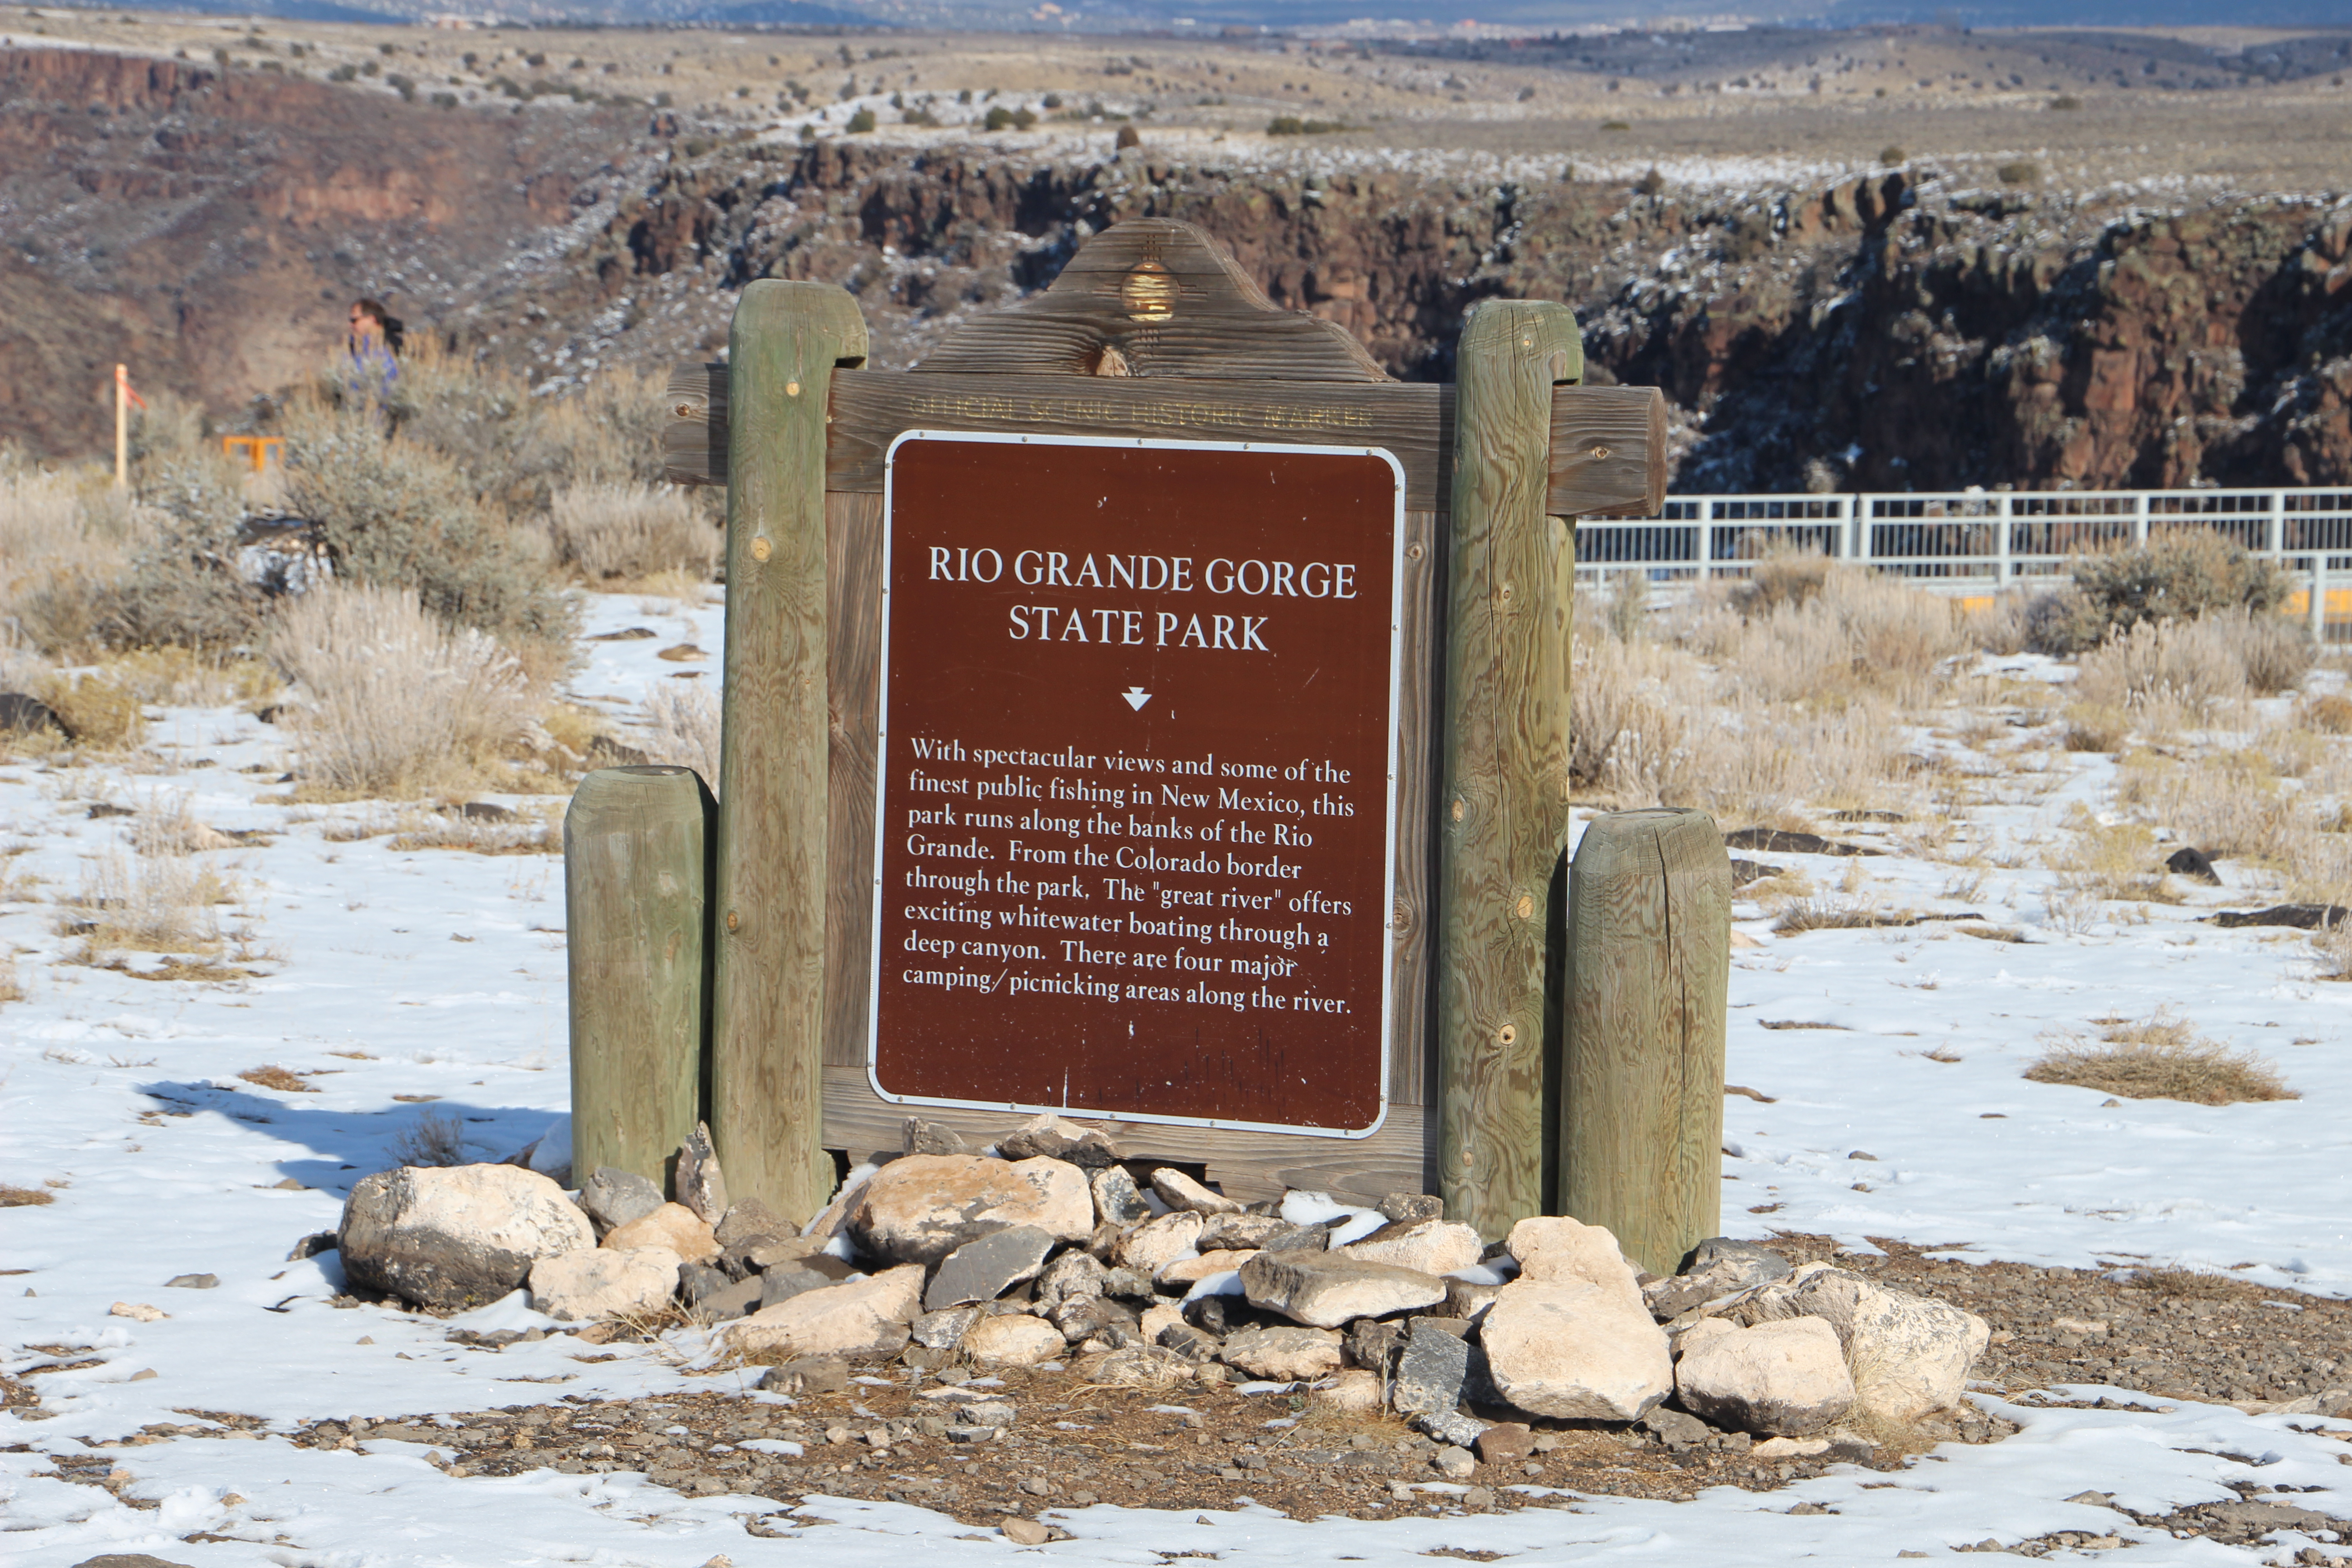 Rio Grande Gorge State Park The Gift Of Travel